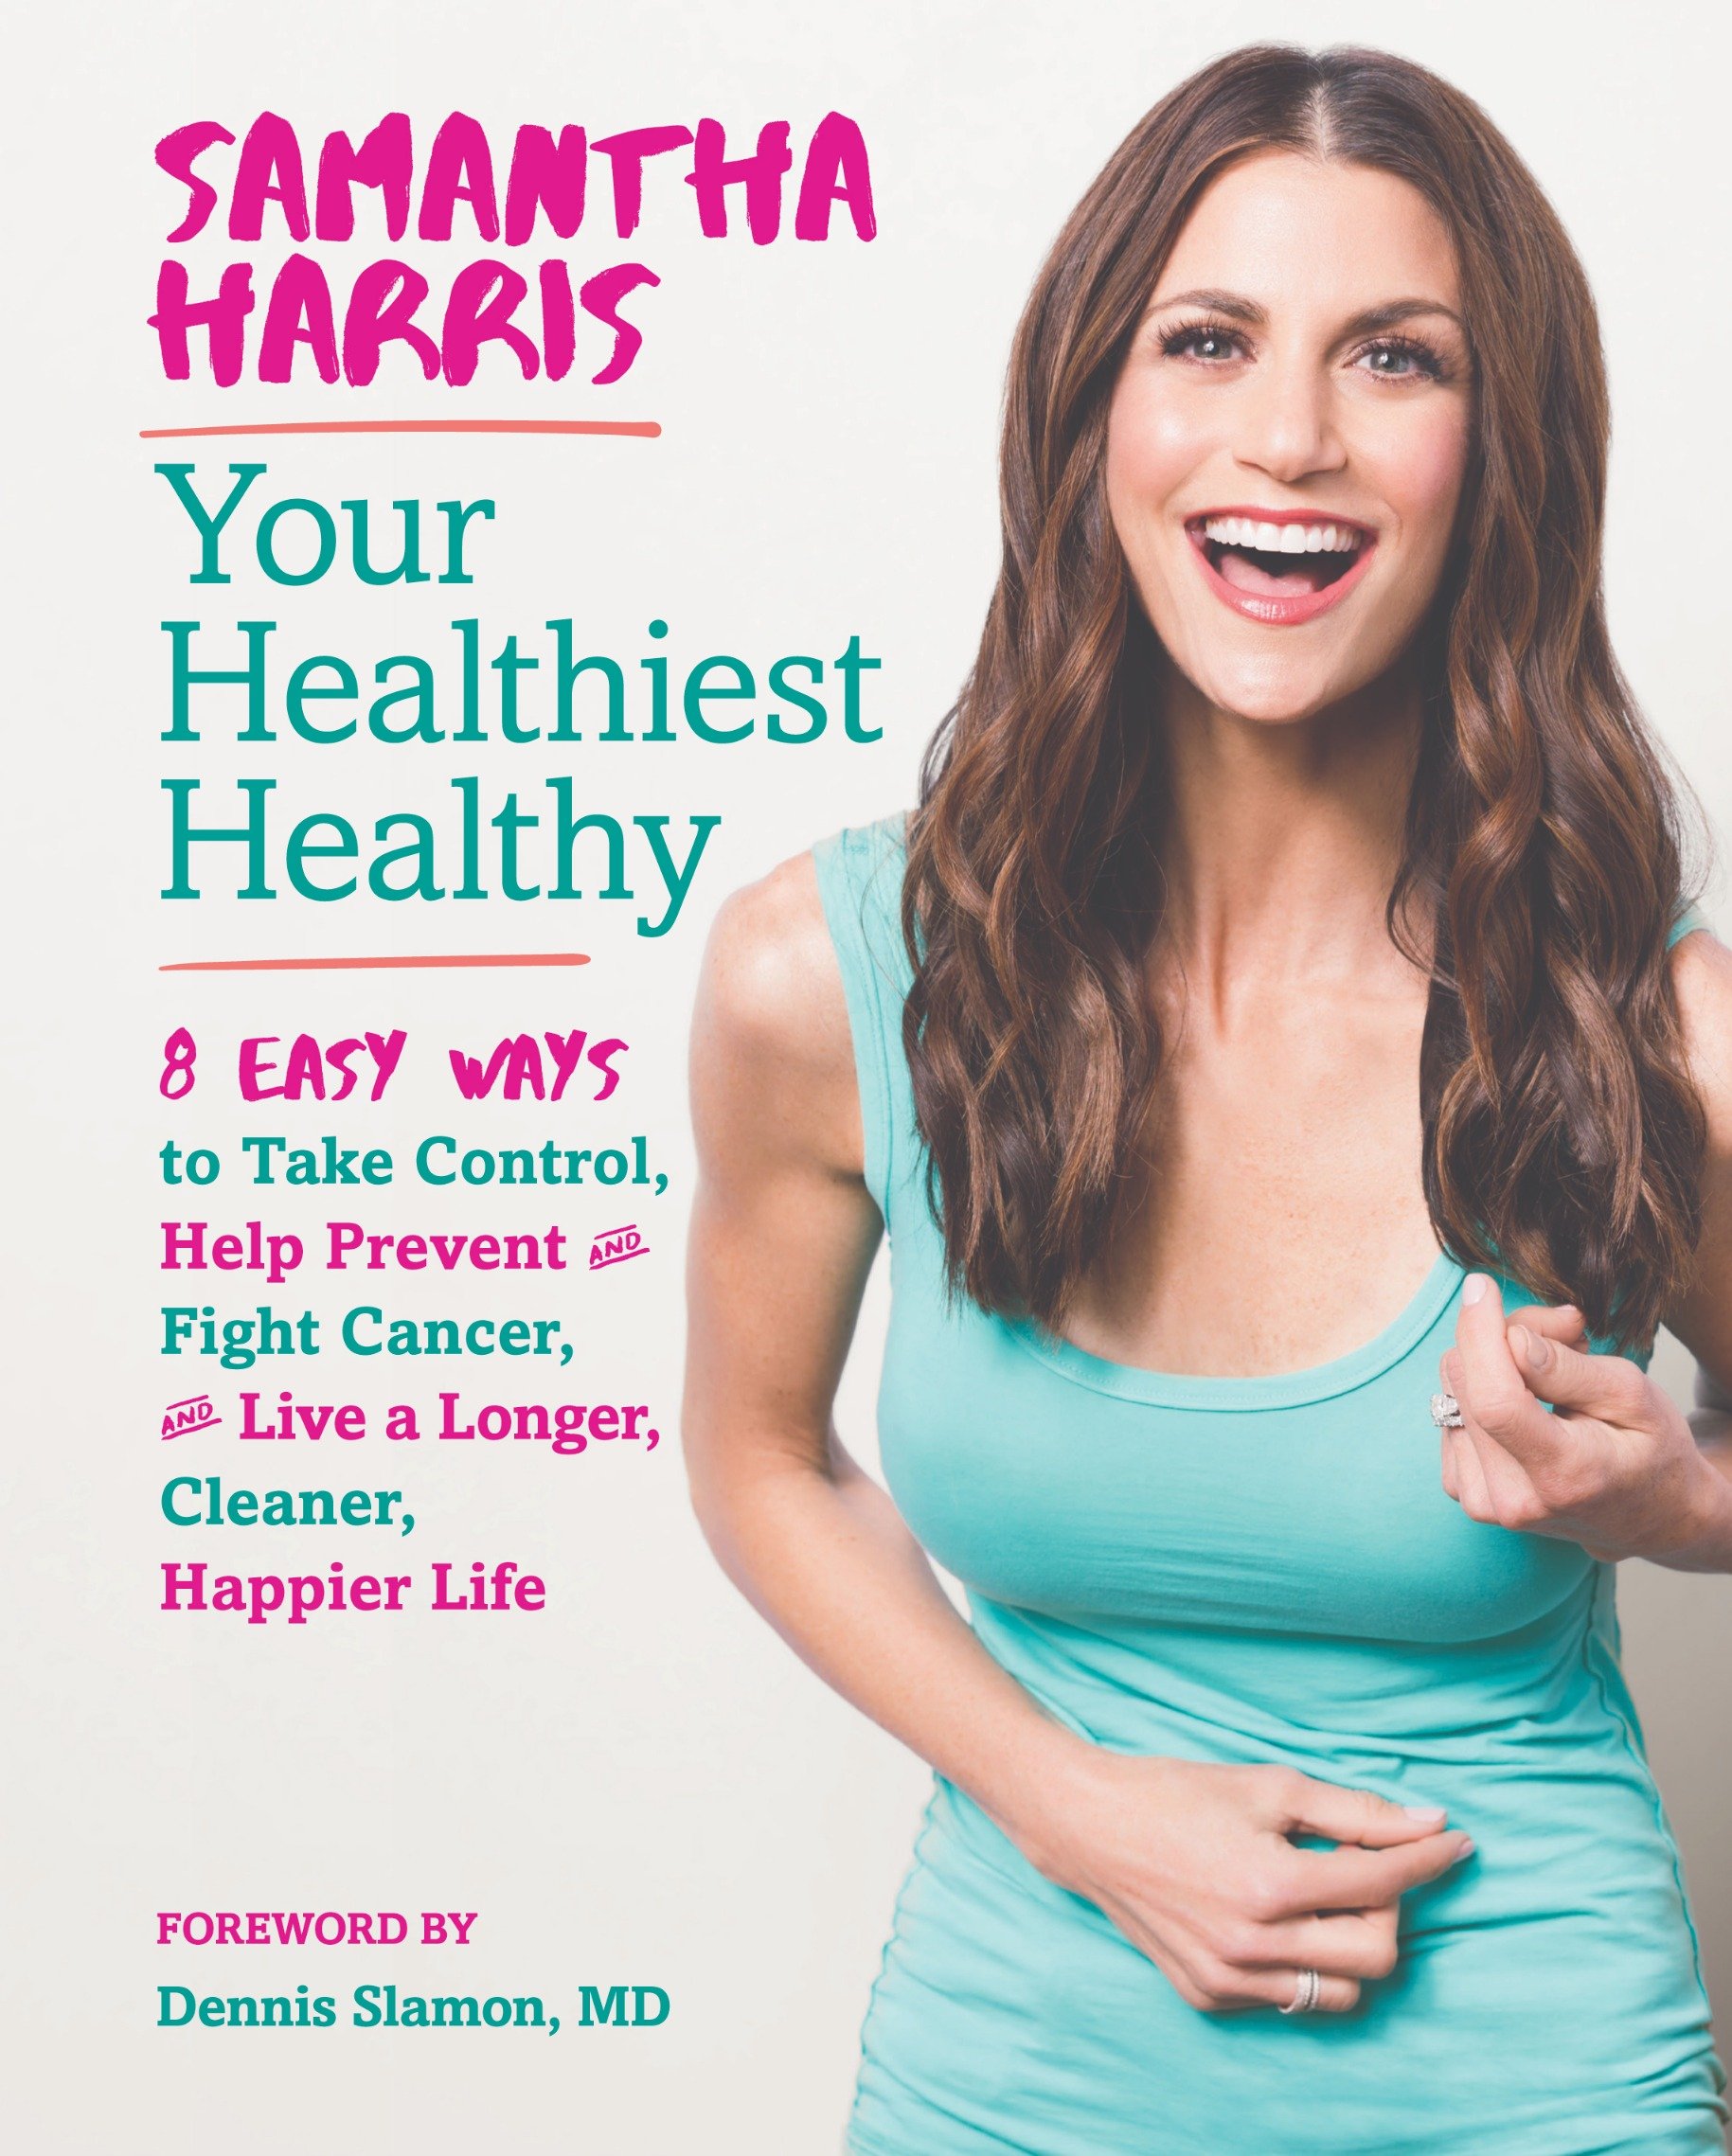 Founded By @SamanthaHarris
8 Easy Ways to Take Control, Help Prevent & Fight Cancer, and Live a Longer, Cleaner, Happier Life

Out 9/18/18